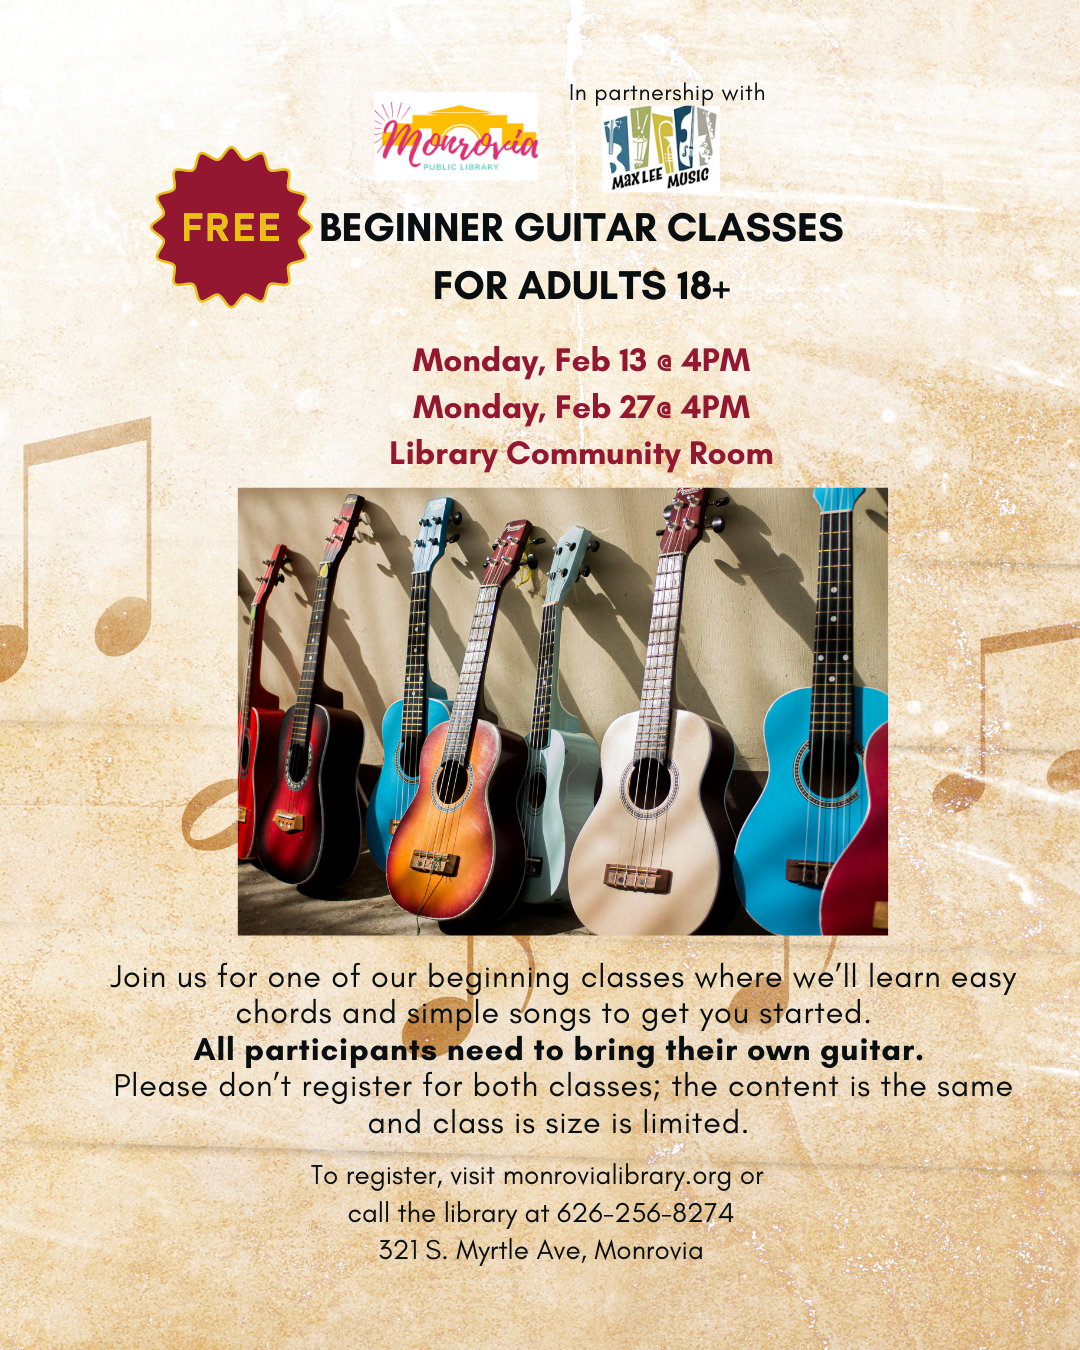 Beginning Guitar Classes for Adults 18+